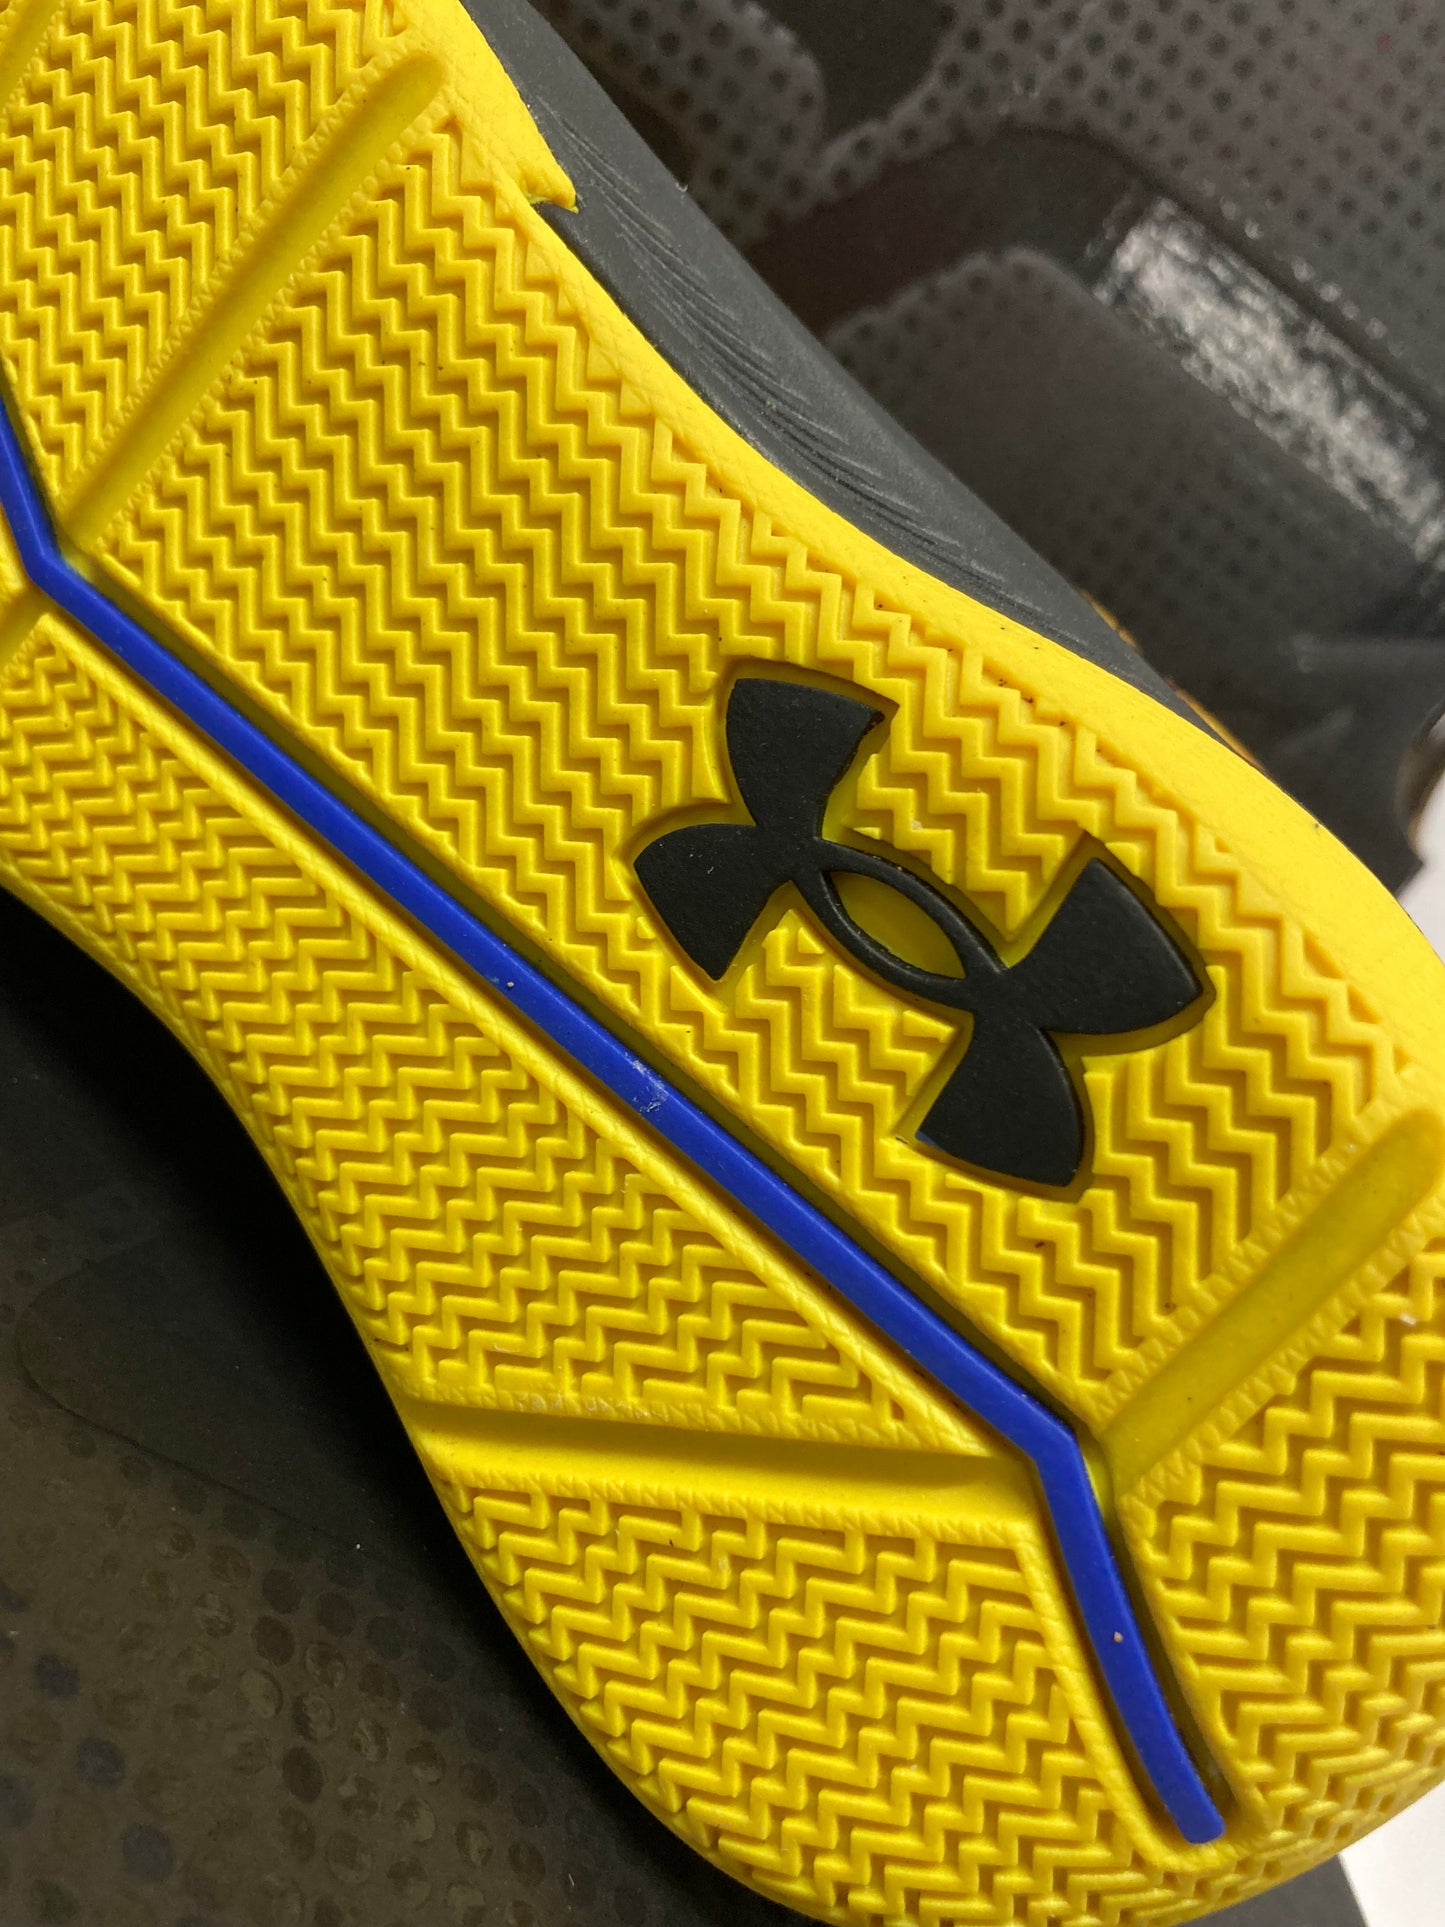 Under Armour Curry 2 Retro TD 'Double Bang'